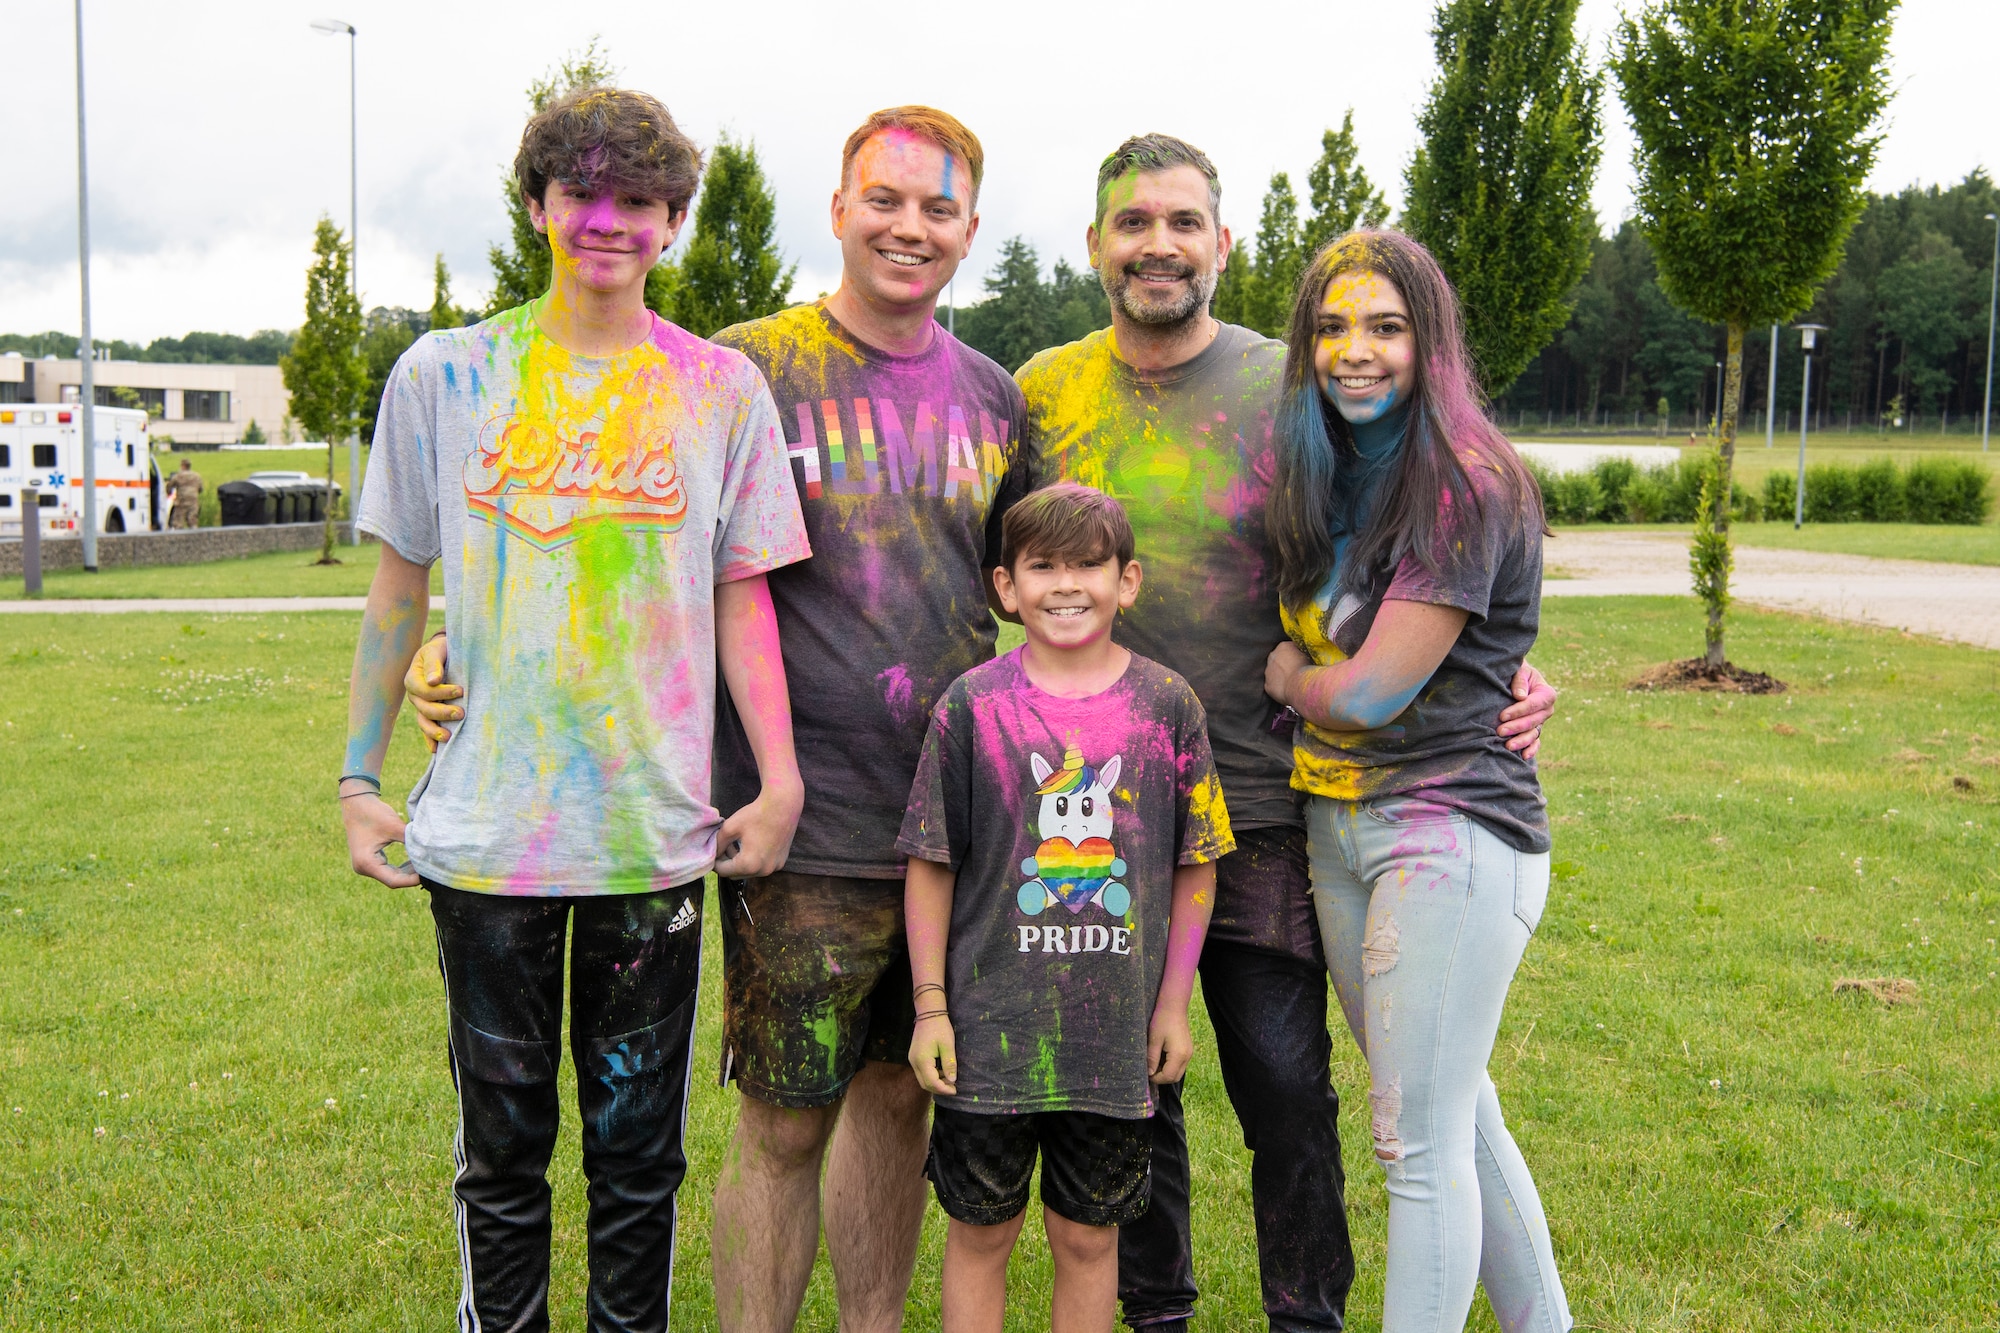 U.S. Air Force Tech. Sgt. Bryan Driscoll, 52nd Contracting Squadron contracting officer, poses for a photo with his spouse, Joel Cutter, and their children during a color run June 30, 2021, on Spangdahlem Air Base, Germany. During Pride Month, the United States  recognizes the valuable contributions of the lesbian, gay, bisexual, transgender, and queer community. (U.S. Air Force photo by Staff Sgt. Melody W. Howley)